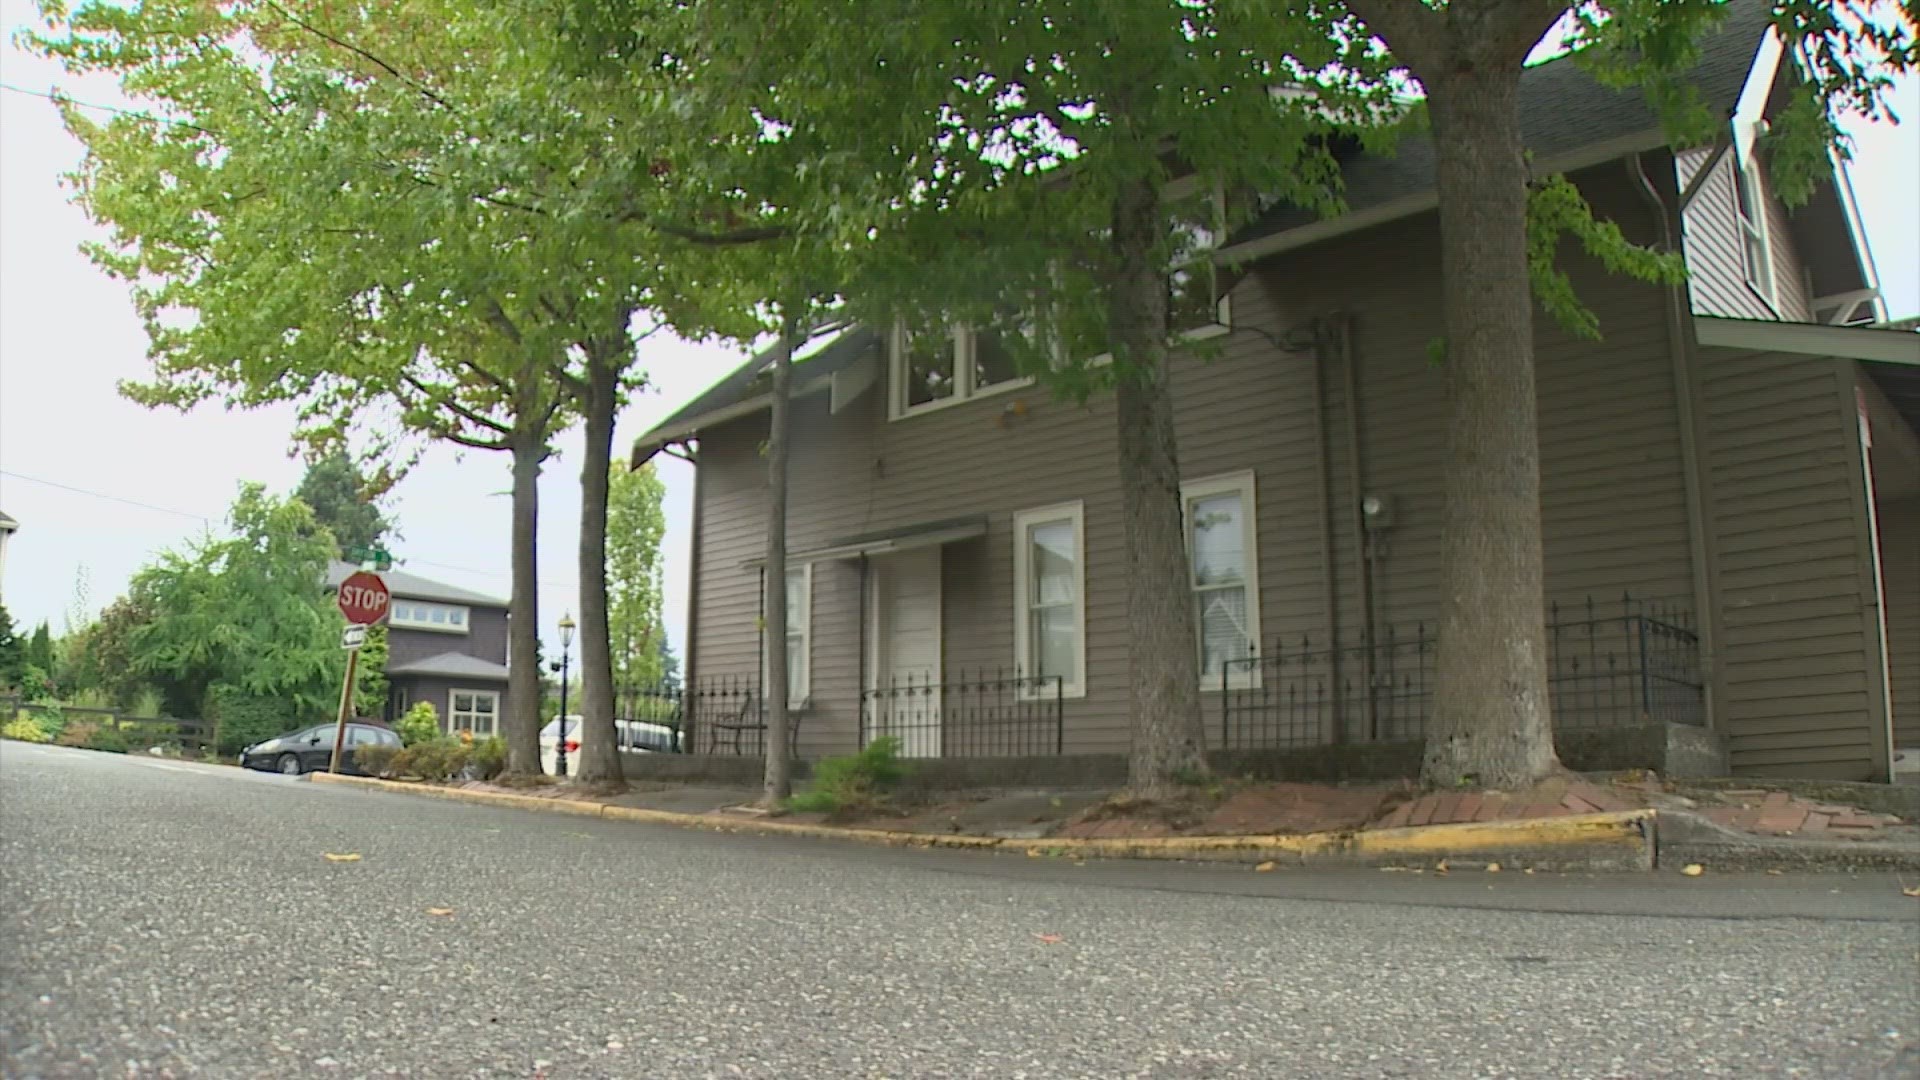 A developer wants to remove five mature trees to build a 17-unit apartment complex in downtown Edmonds, but one neighbor isn't letting go without a fight.